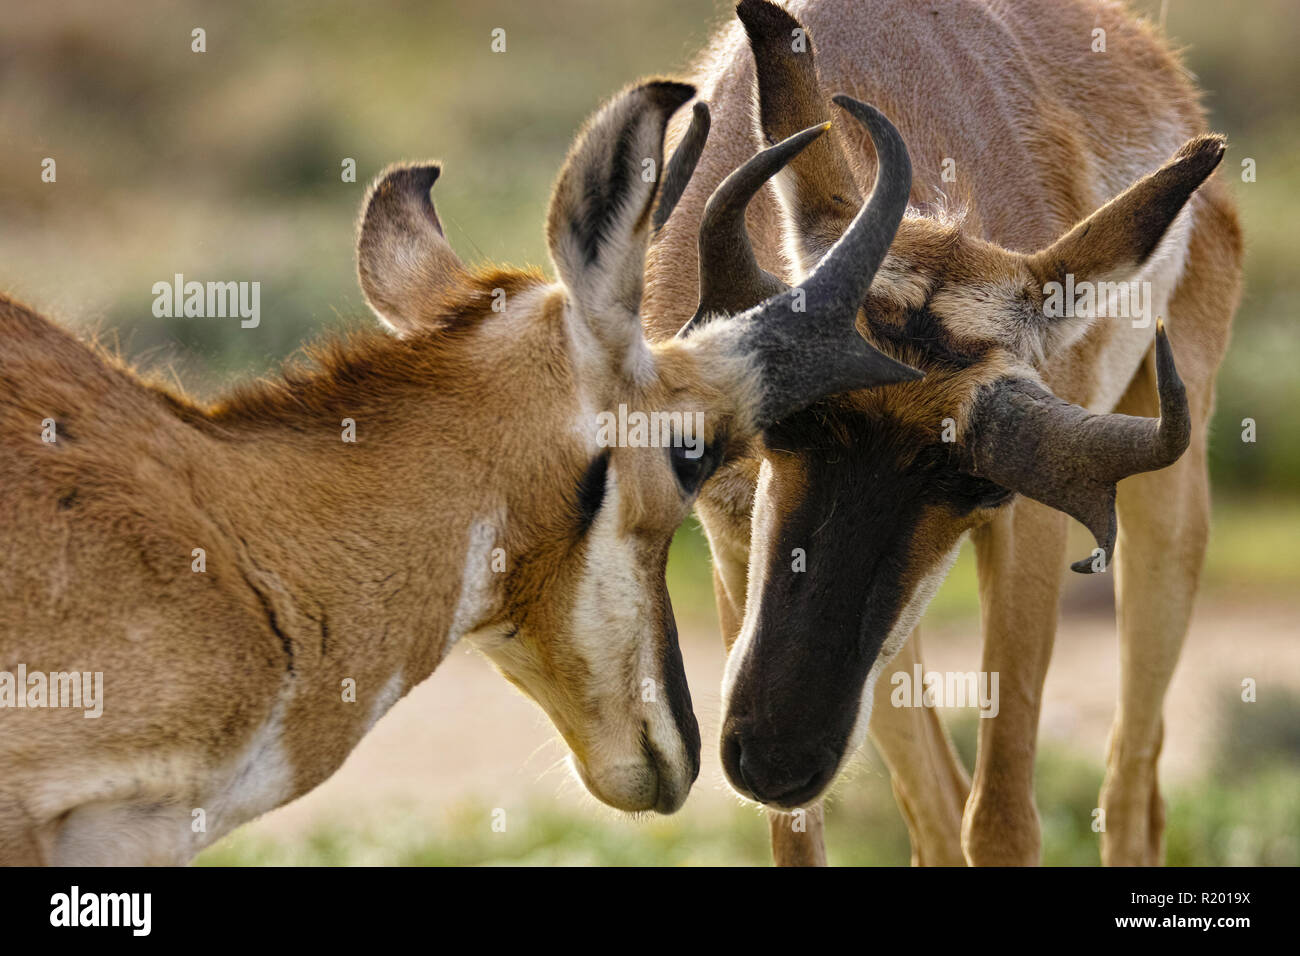 Baja California Pronghorn (Antilocapa americana peninsularis). Old and juvenile male sniffing at each other. The wild population is estimated at 200. Mexico, Baja California Sur, Baja California Desert National Park Stock Photo